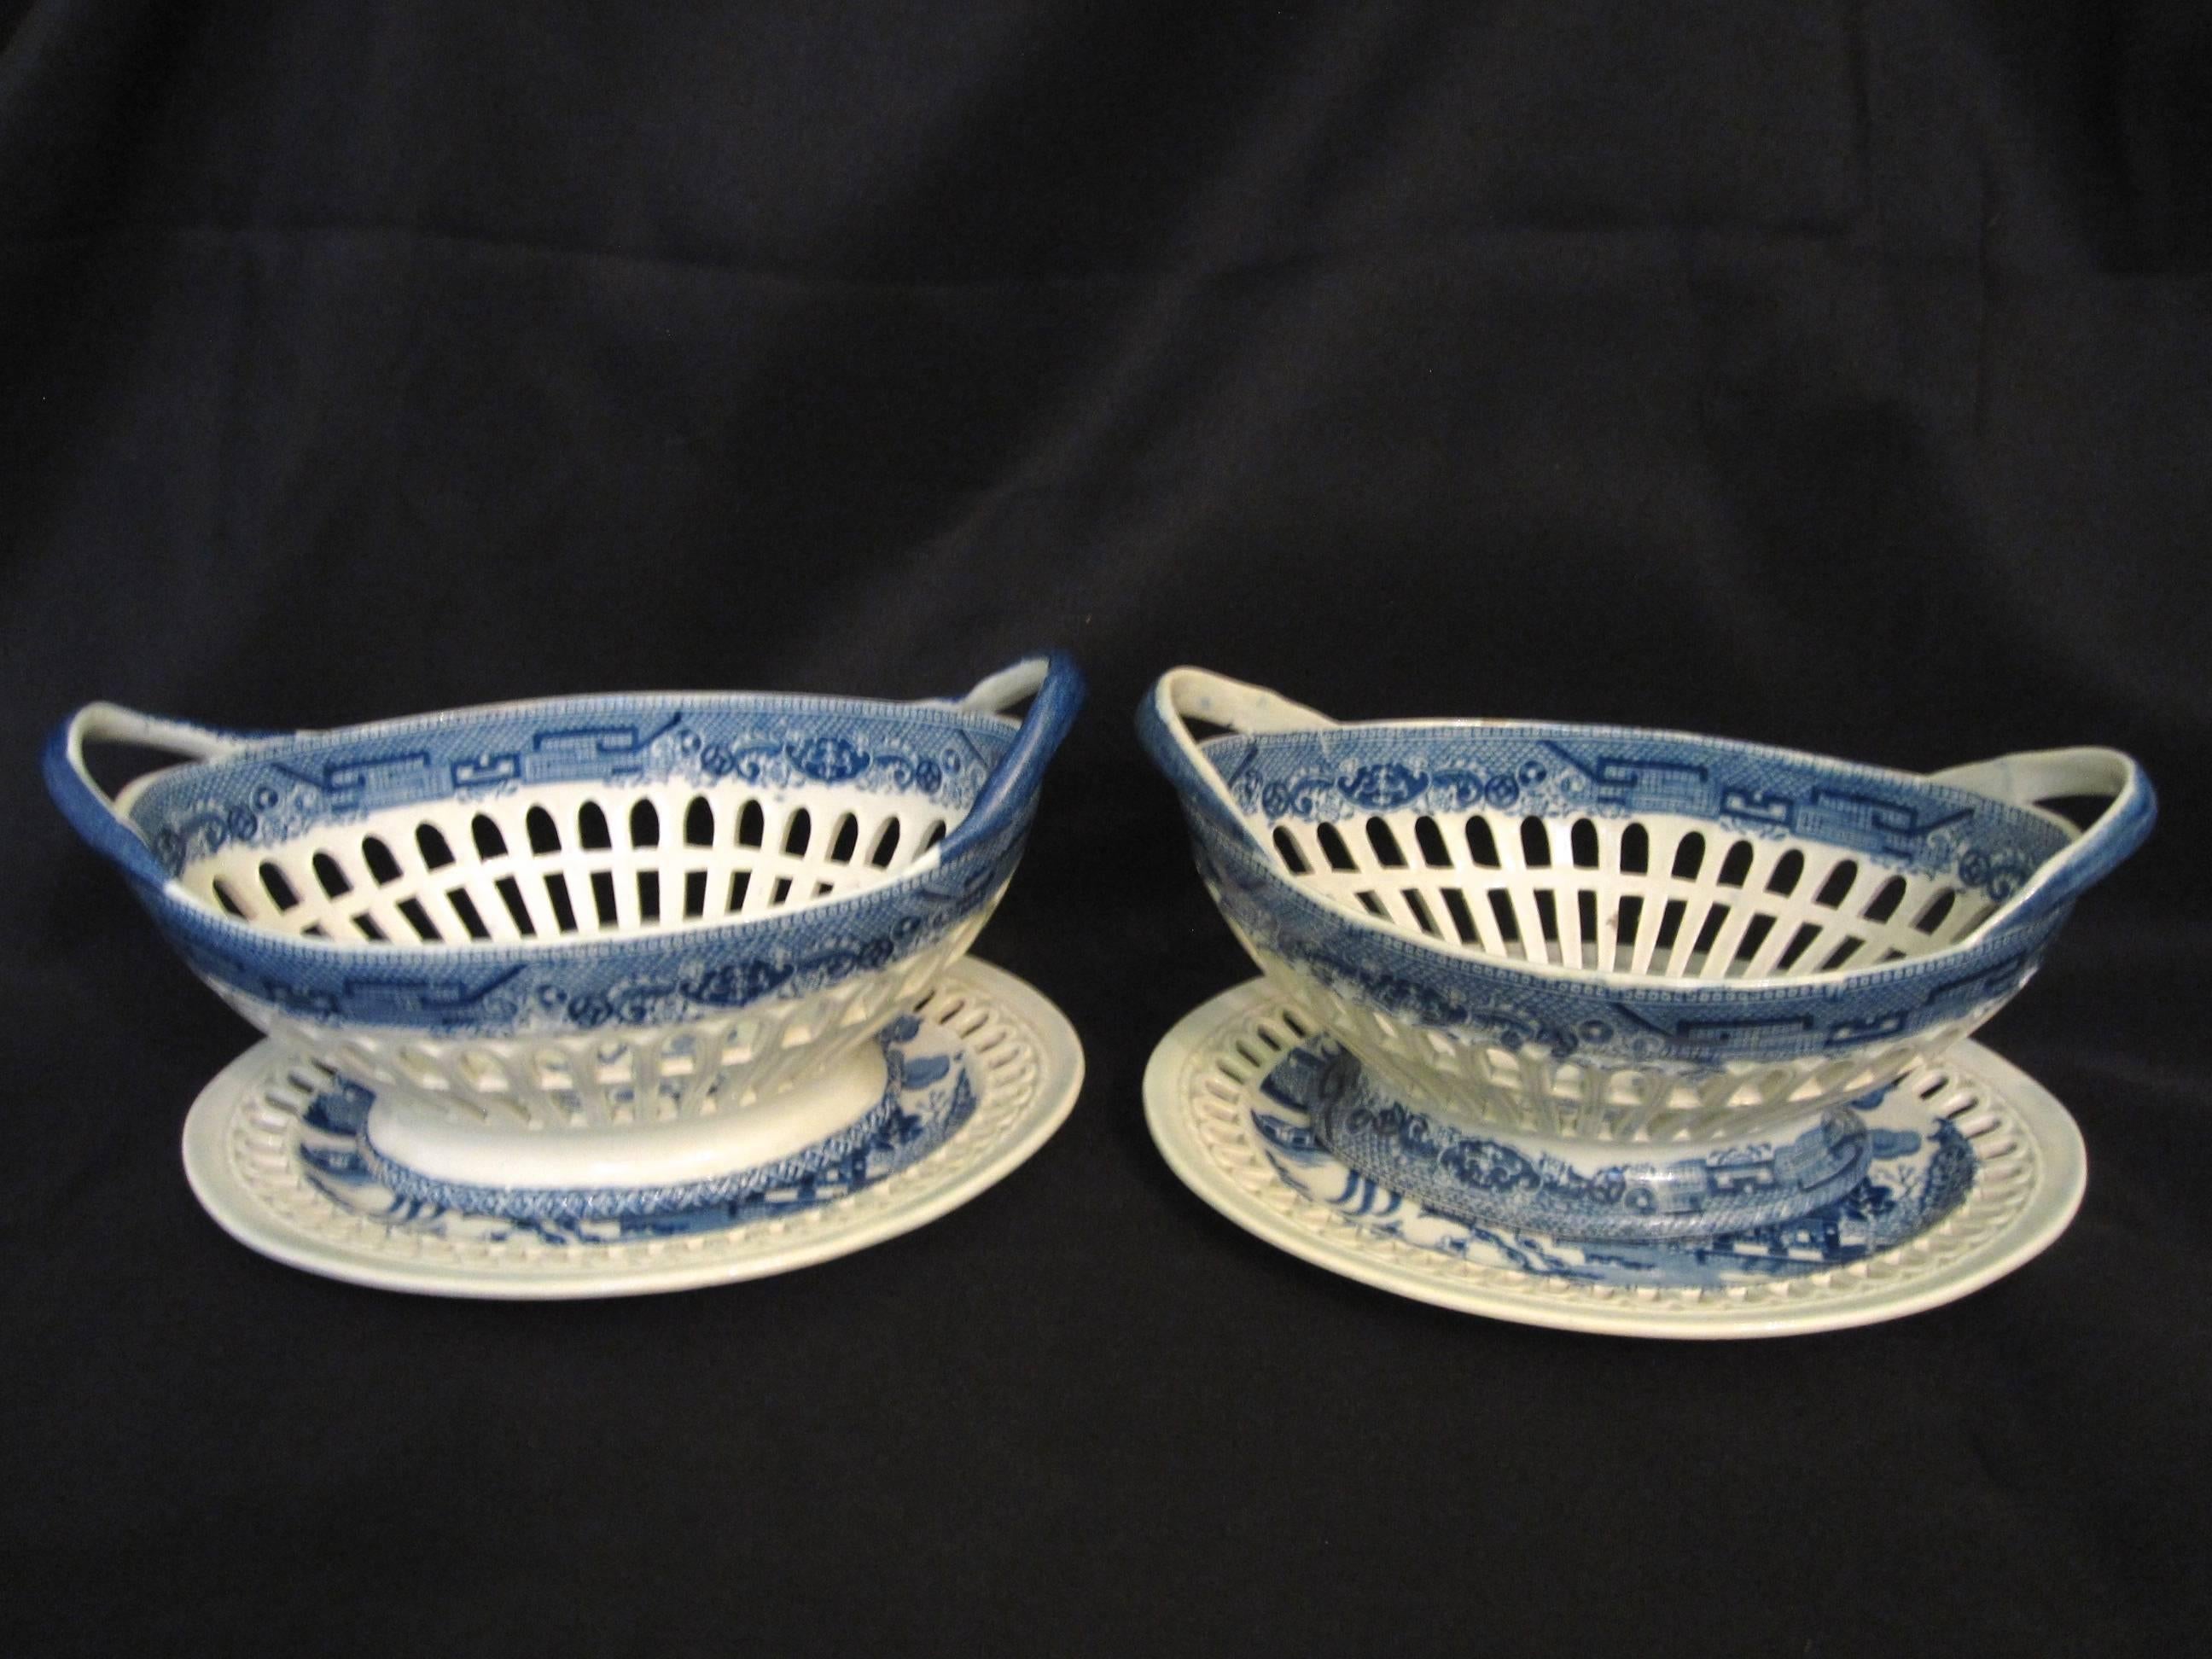 A near pair of English Staffordshire, pearlware chestnut baskets on stands, circa mid-late 1700s. A cobalt blue on white chinoiserie transferware pattern called willow or bird, the handled baskets are pierced, the stands have reticulate rims. The